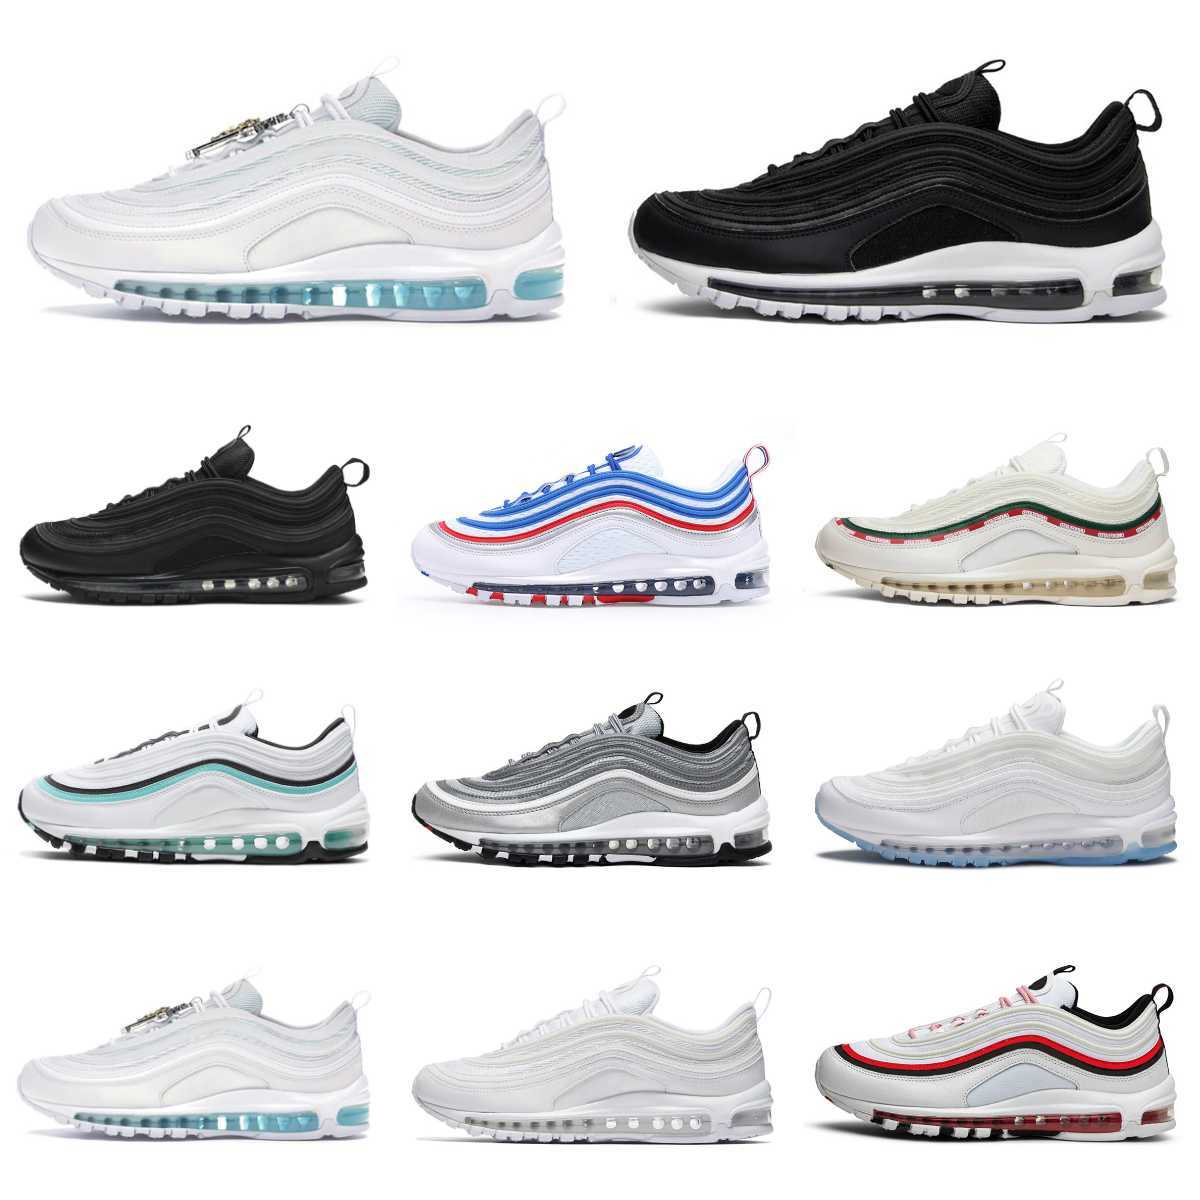 

Trainers Max 97 Sports Shoes Mens Women MSCHF X INRI Jesus Undefeated Black Summit Triple AirMaxS White Metalic Gold Designer Air 97s Sean Sliver Bullet Sneakers, #27 celestial gold